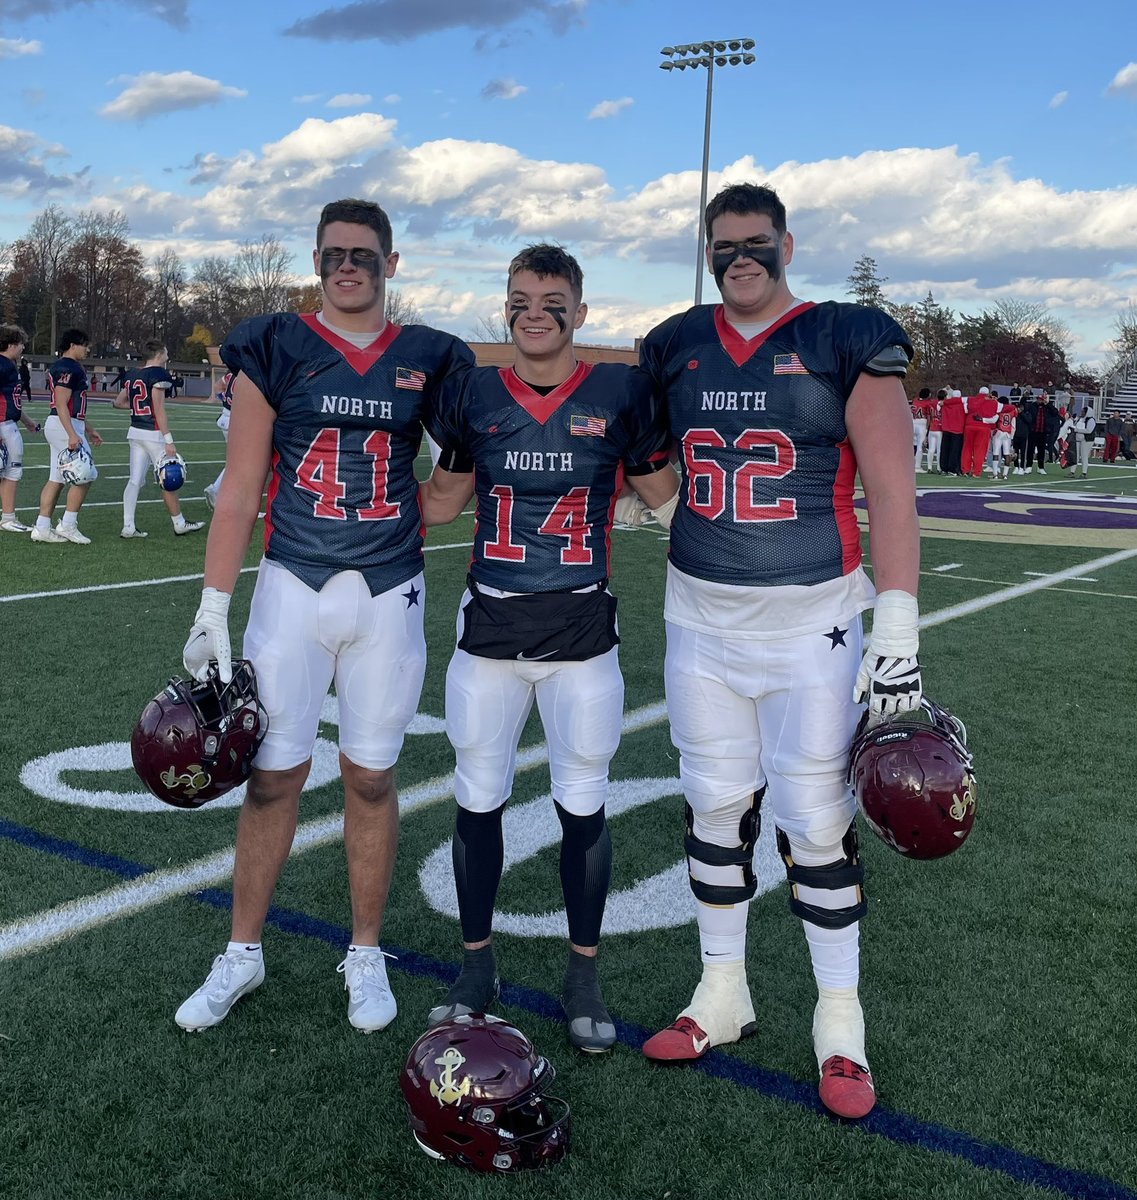 Great job representing The Admirals in this afternoon’s SOFCA Exceptional Senior Bowl. @Joe_McGann50 @Mikey_Rescigno3 and @colin_cubberly all did our program proud.